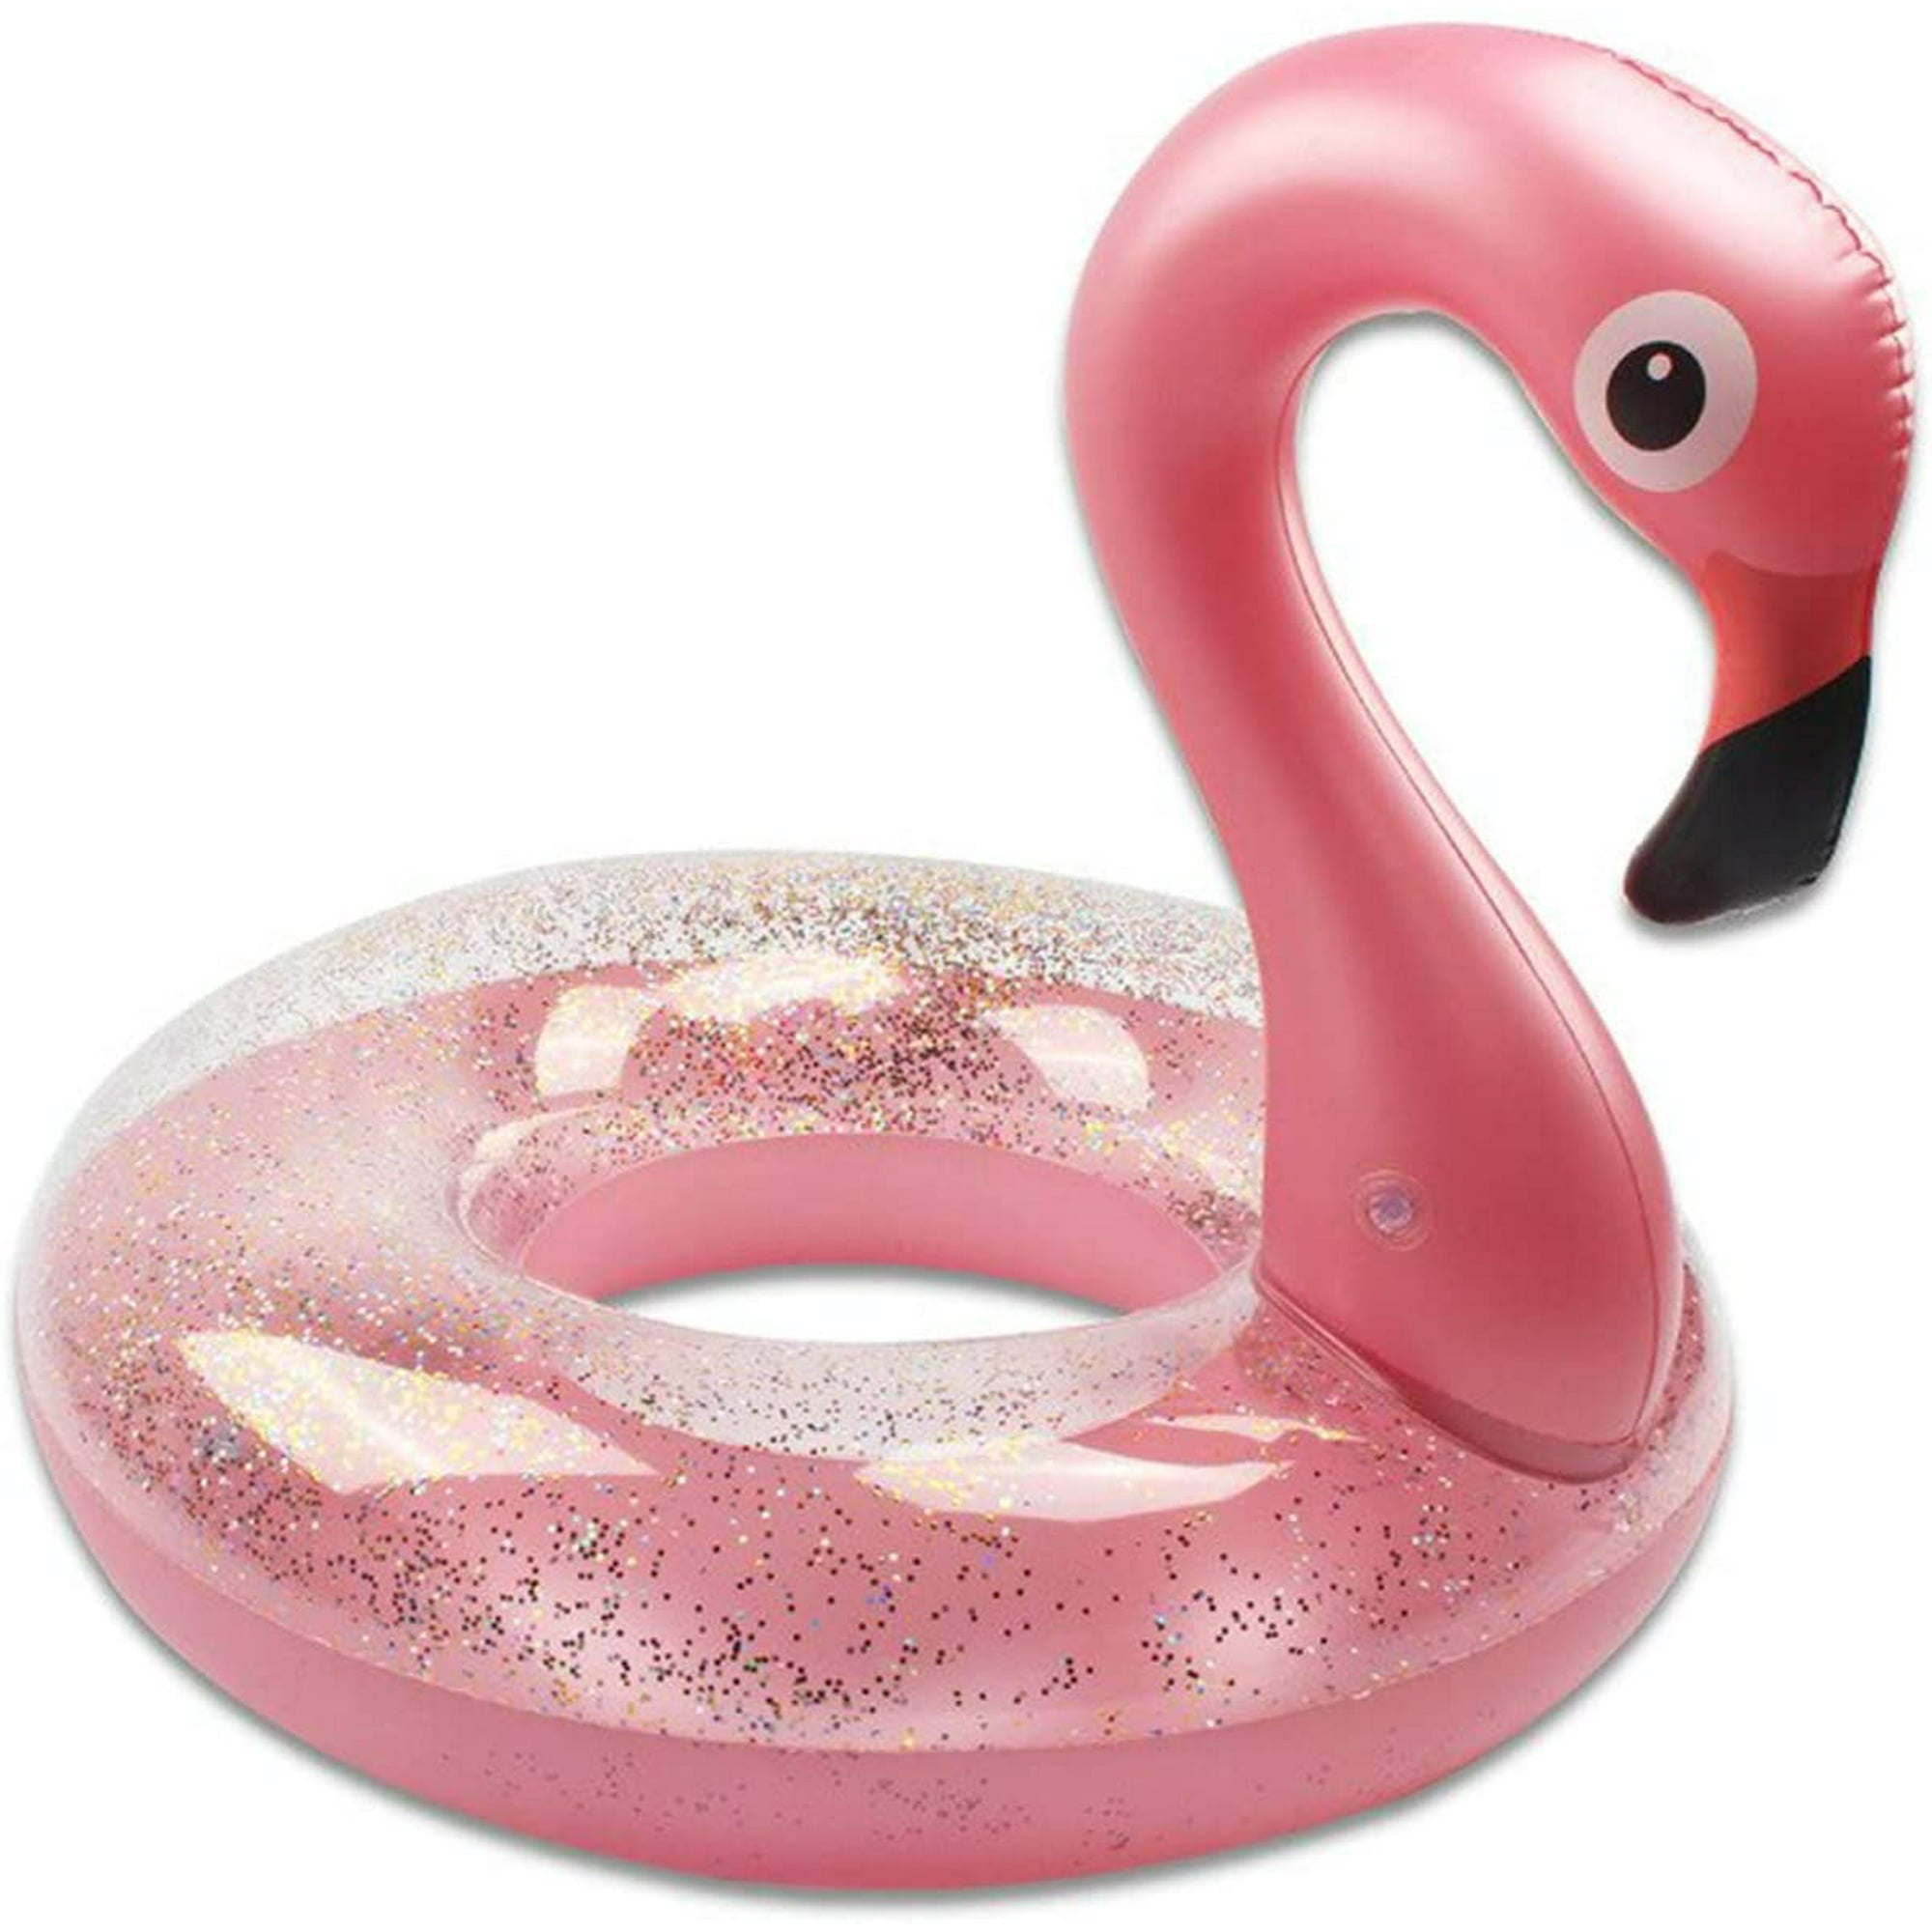 Fleur Inflatable Flamingo Pool Floats for Kids and Adults with Glitters, Fun Beach Water Floaties, Pool Toys, Summer Pool Outdoor Supplies Party Toys for Kids | 36 Inch